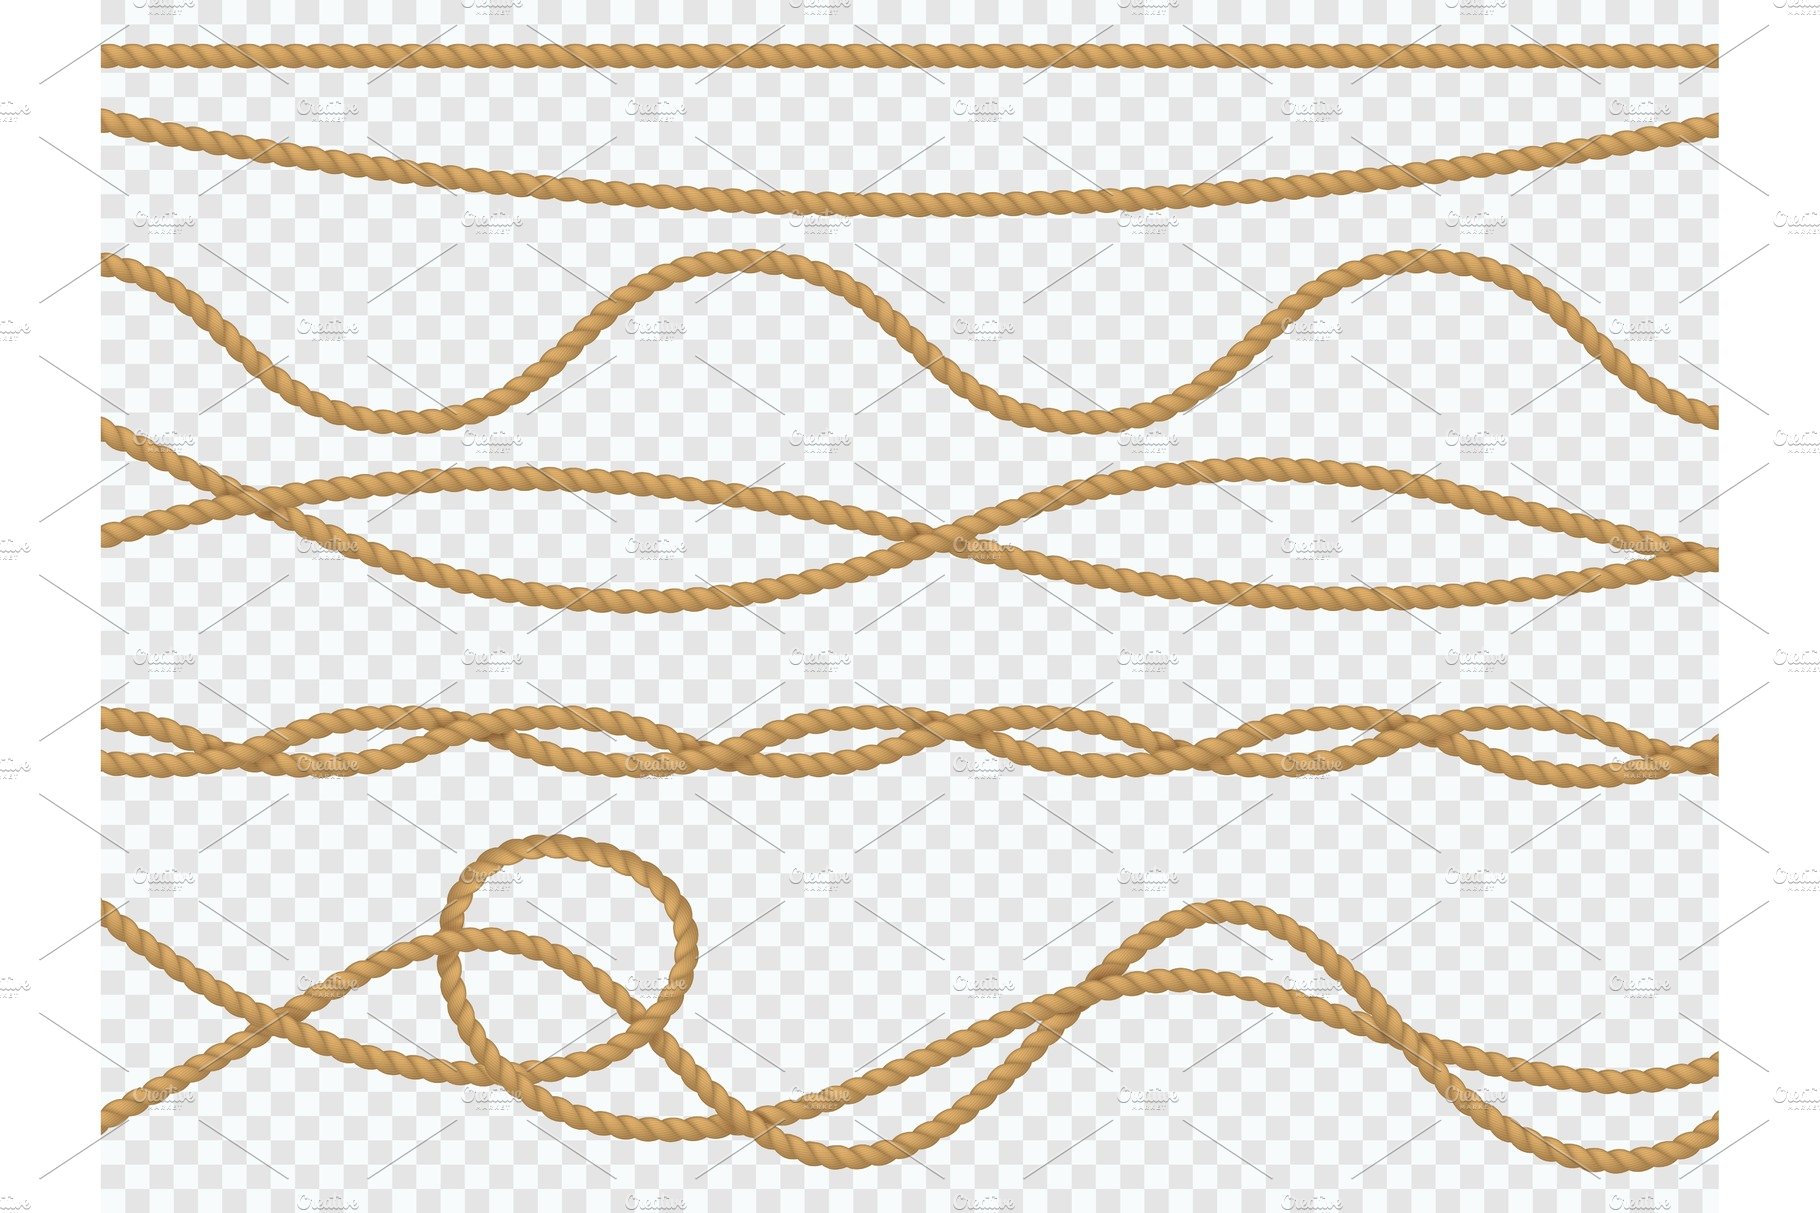 Realistic fiber ropes. Curve rope cover image.